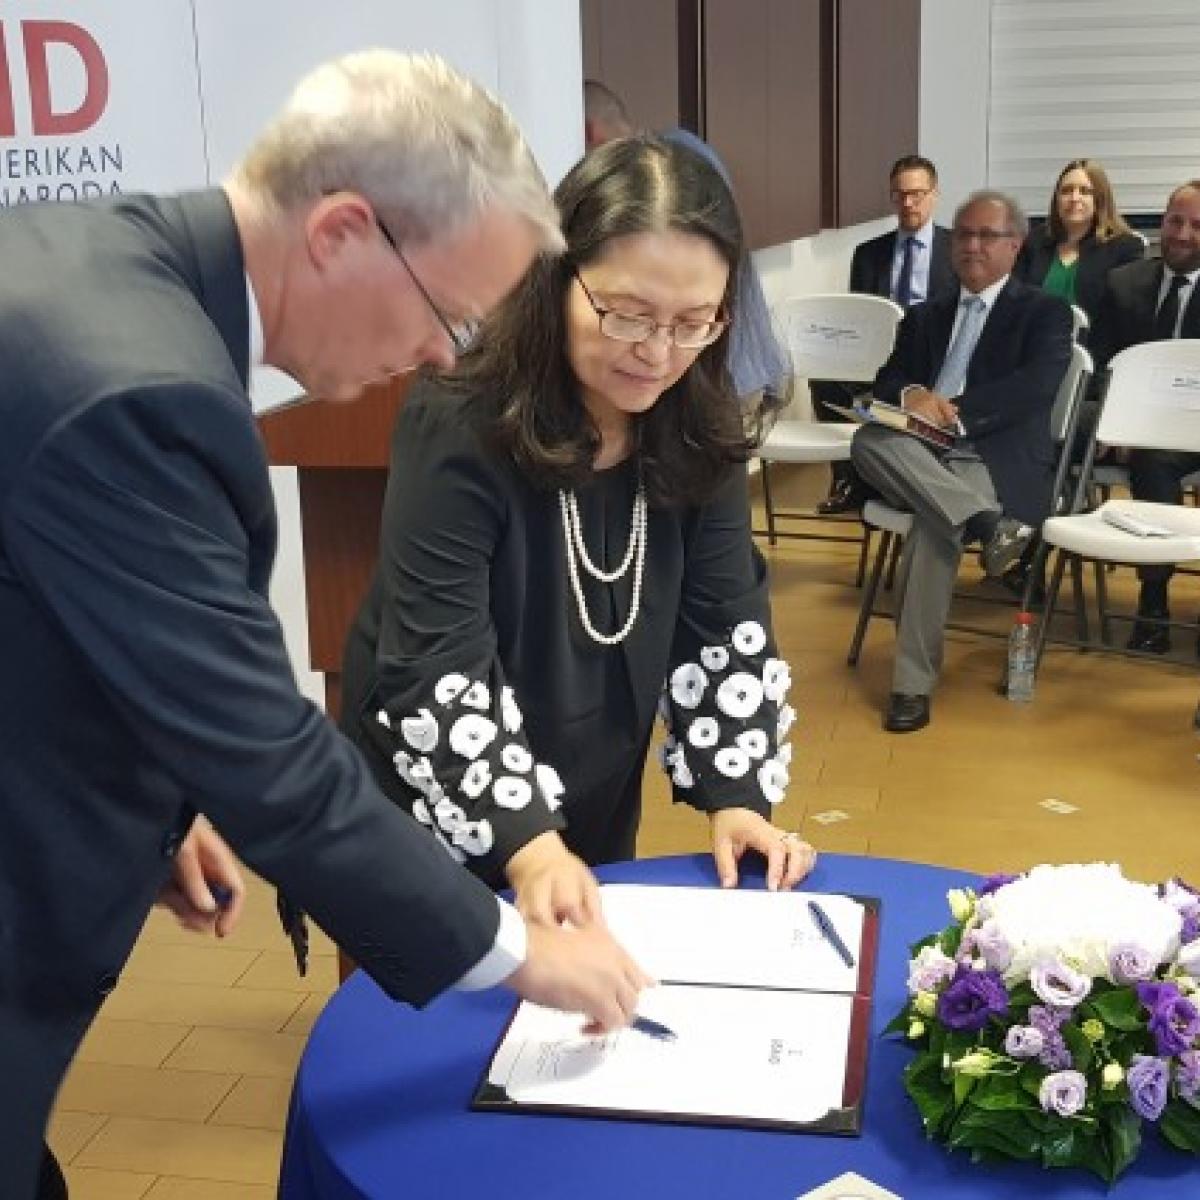 USAID Kosovo Swearing in Ceremony: Ambassador Delawie and Lisa Magno sign the Oath of Office